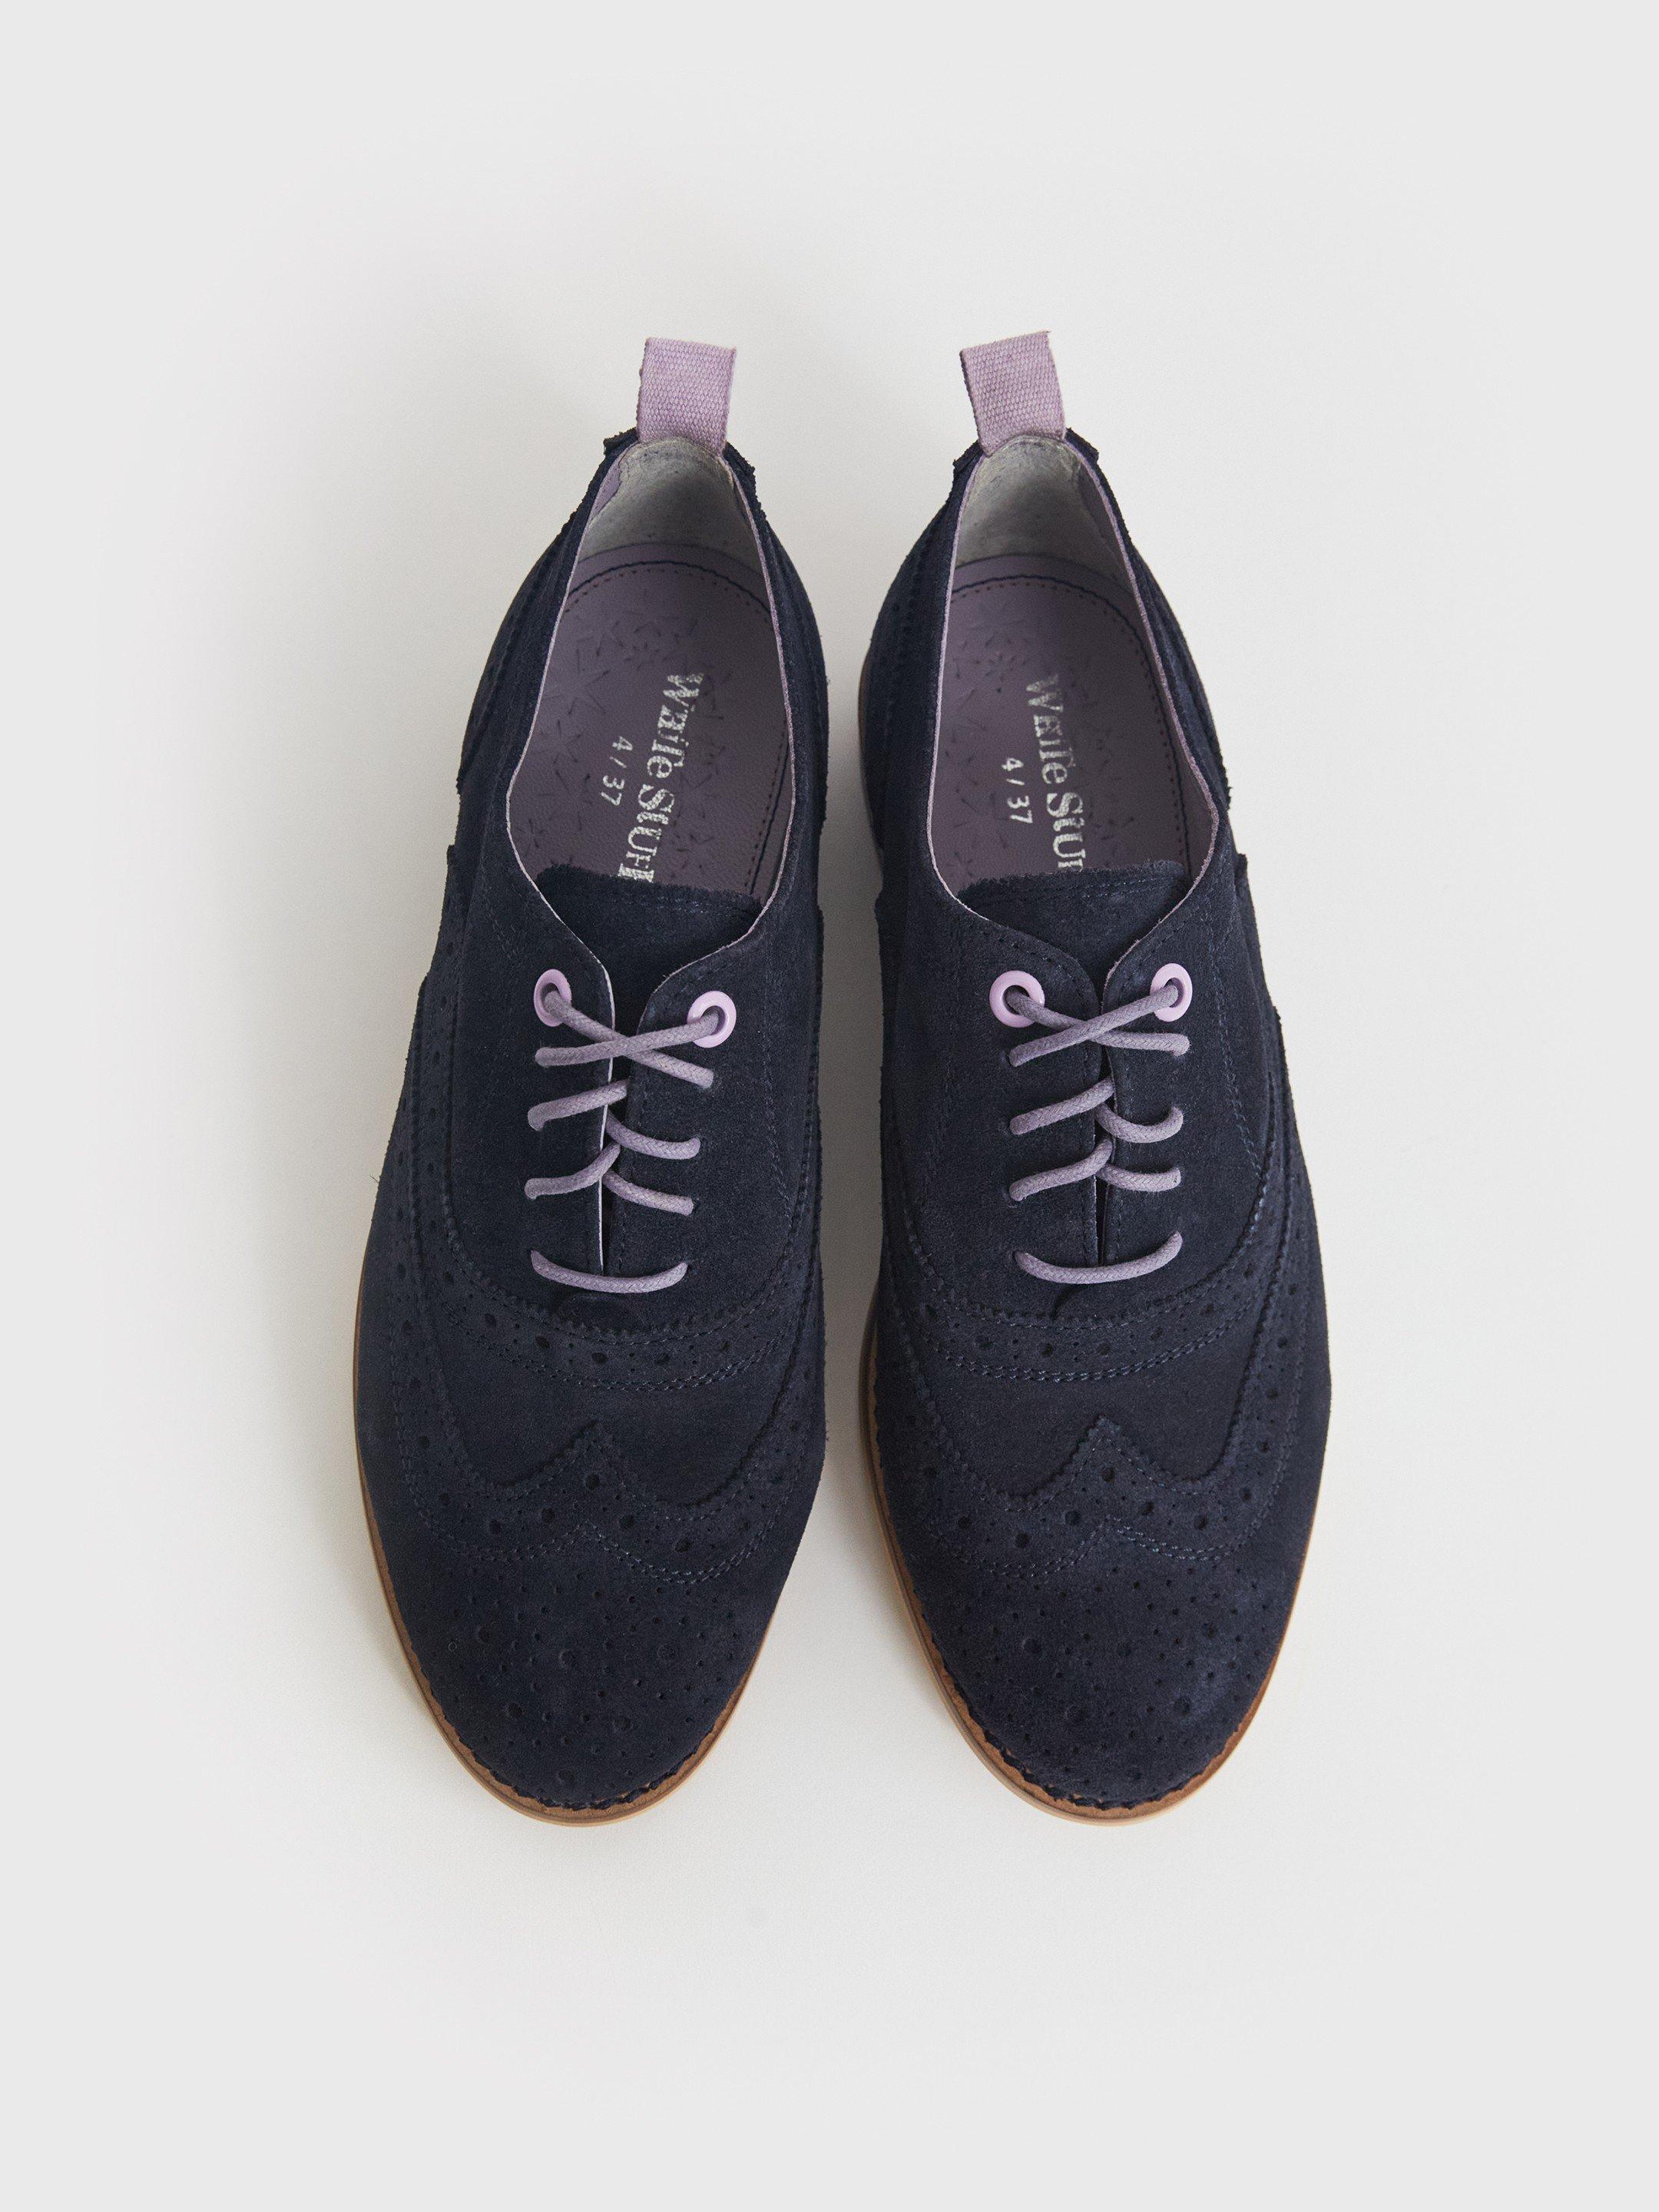 Thistle Lace Up Brogue in DARK NAVY - FLAT DETAIL